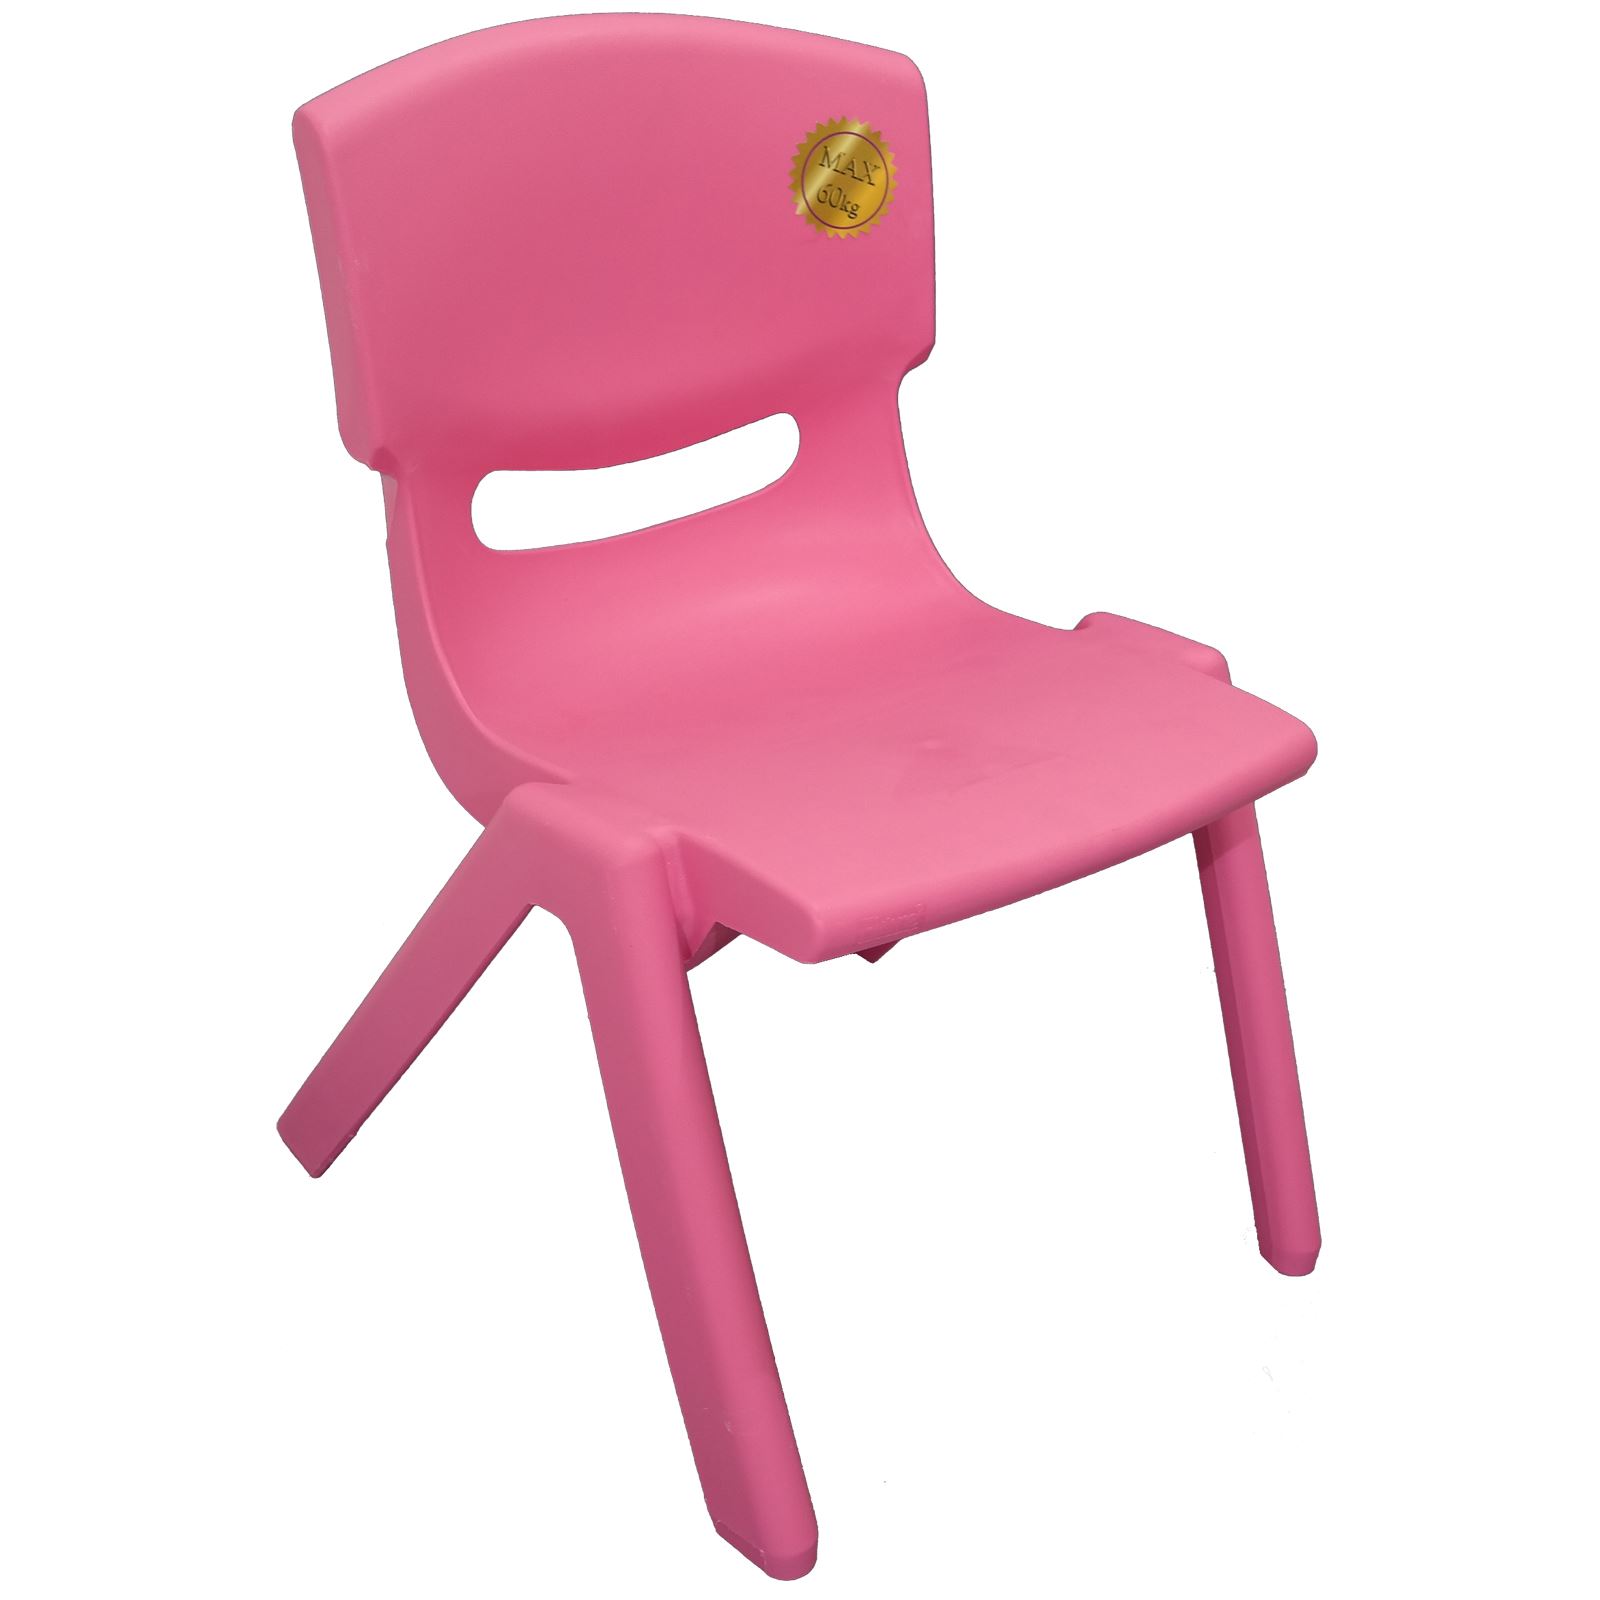 EXTRA STRONG PLASTIC CHILDRENS CHAIRS KIDS TEA PARTY GARDEN NURSERY